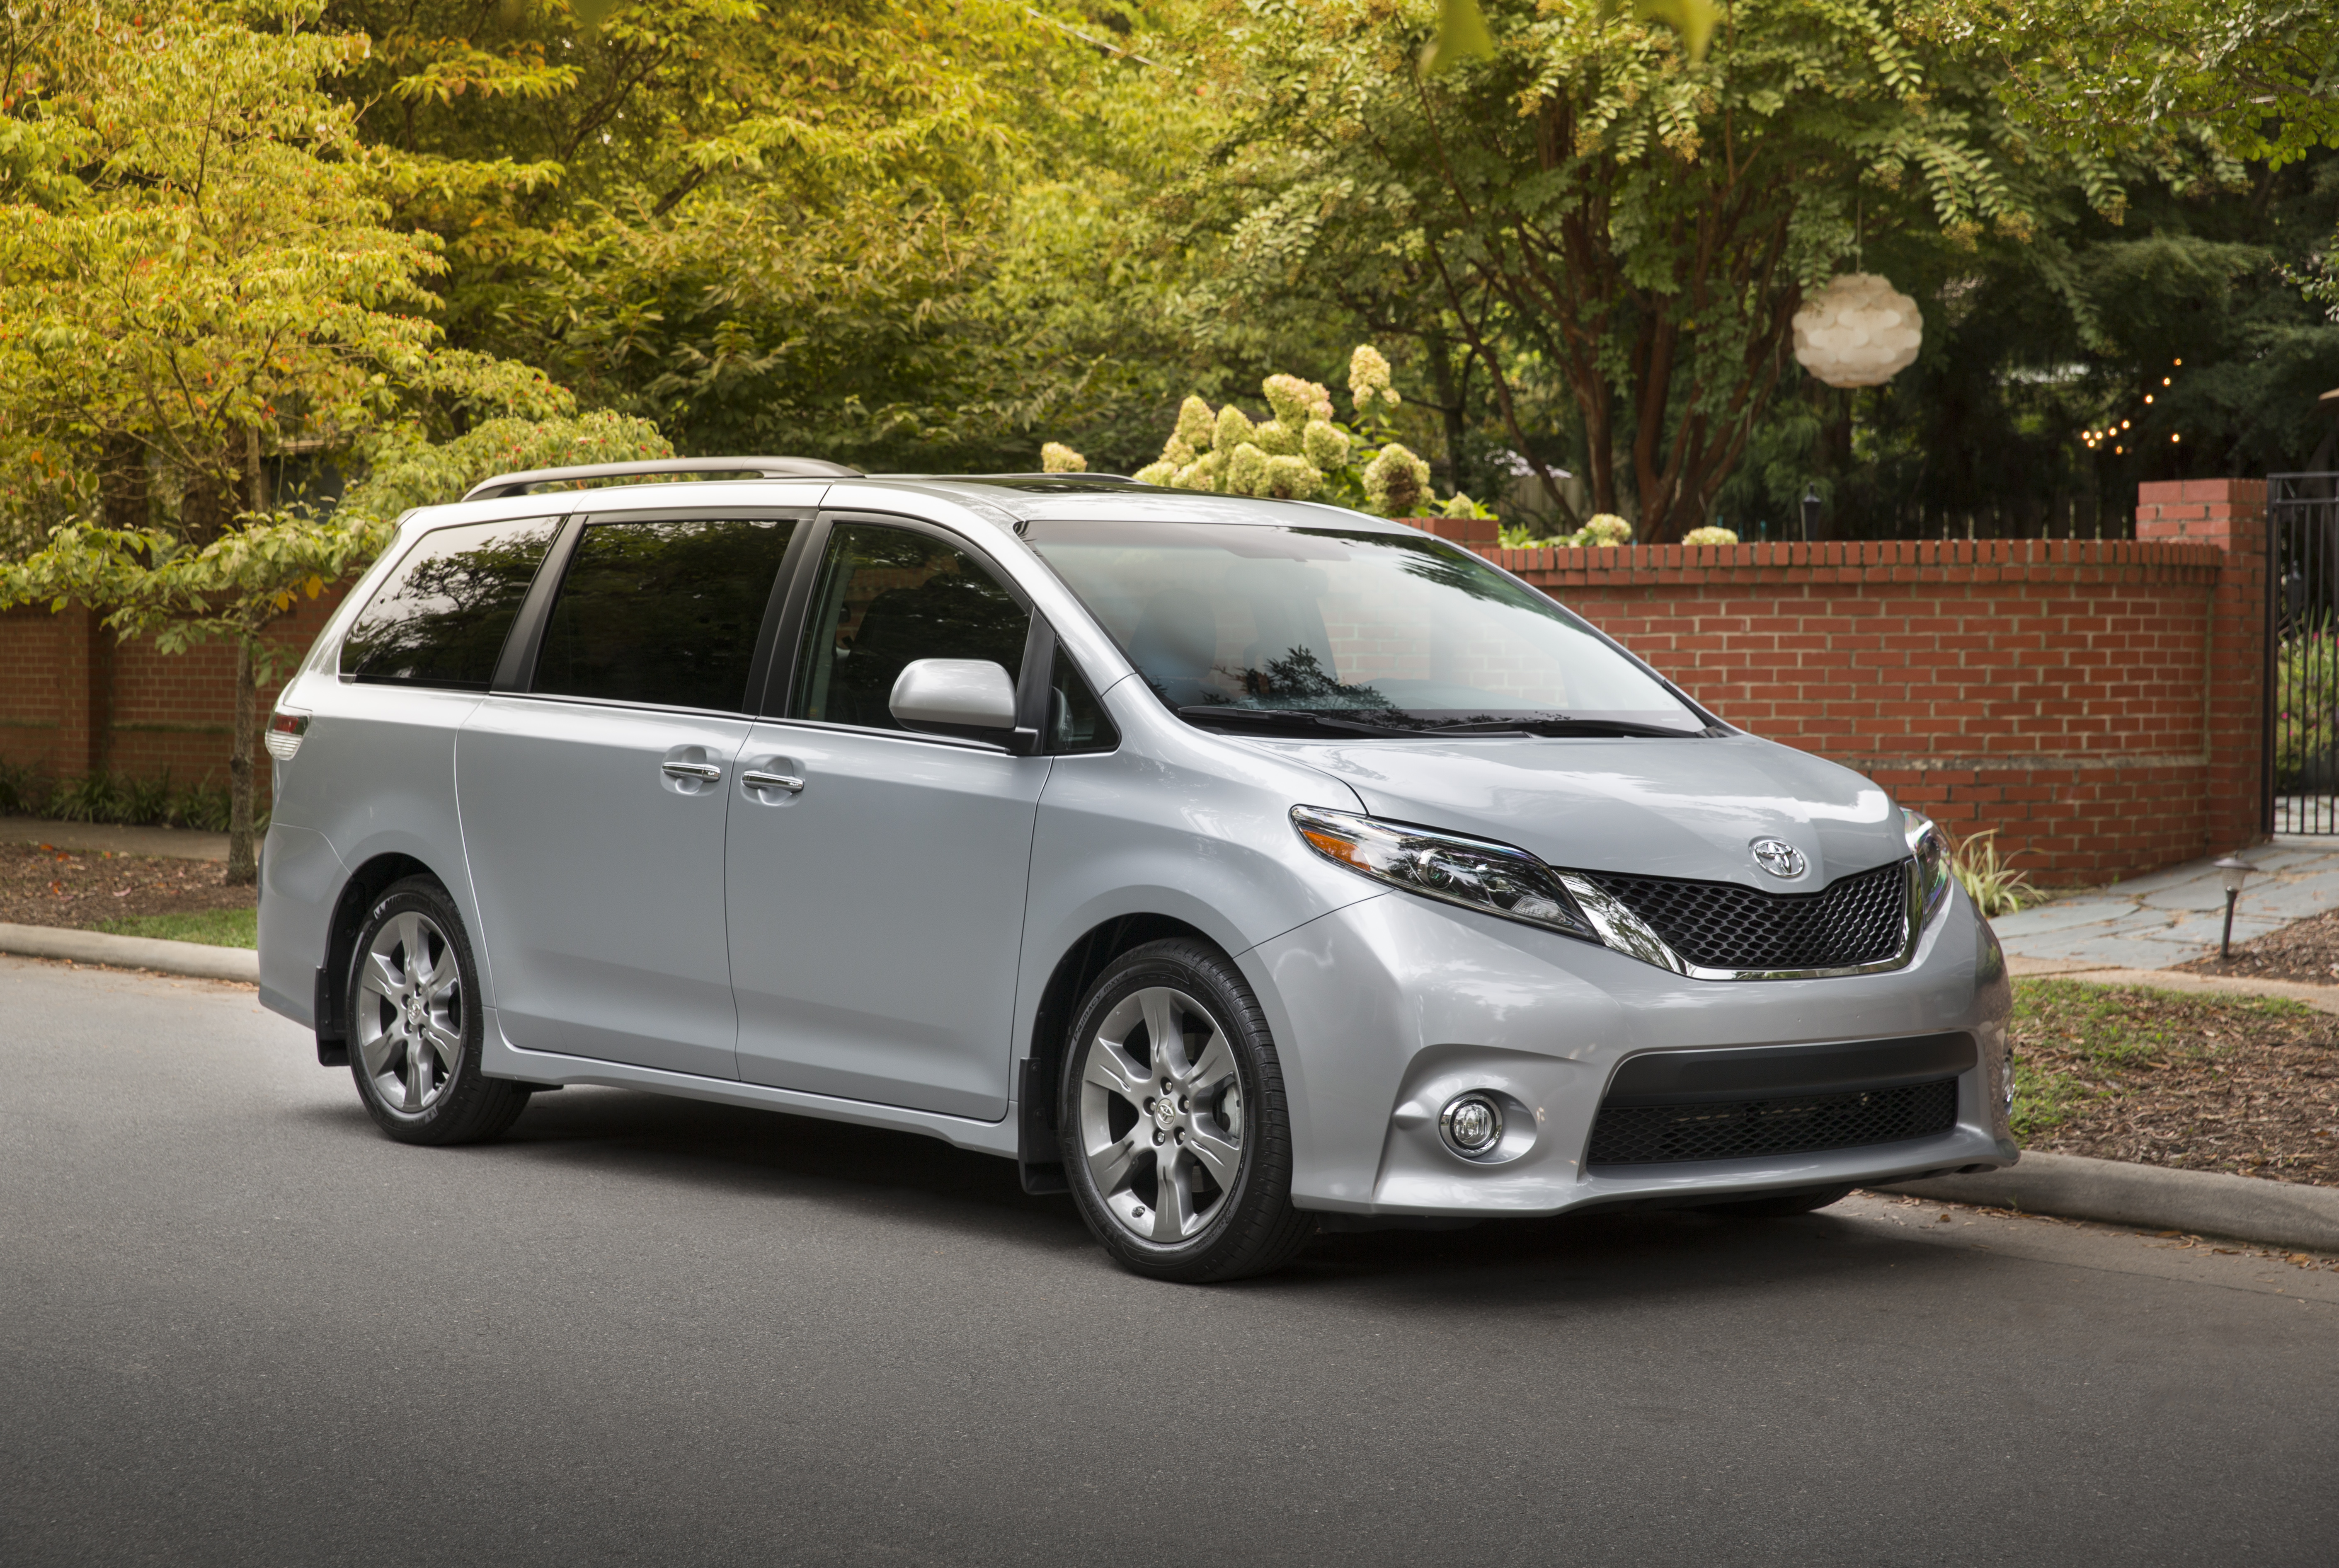 Toyota Sienna exterior specifications